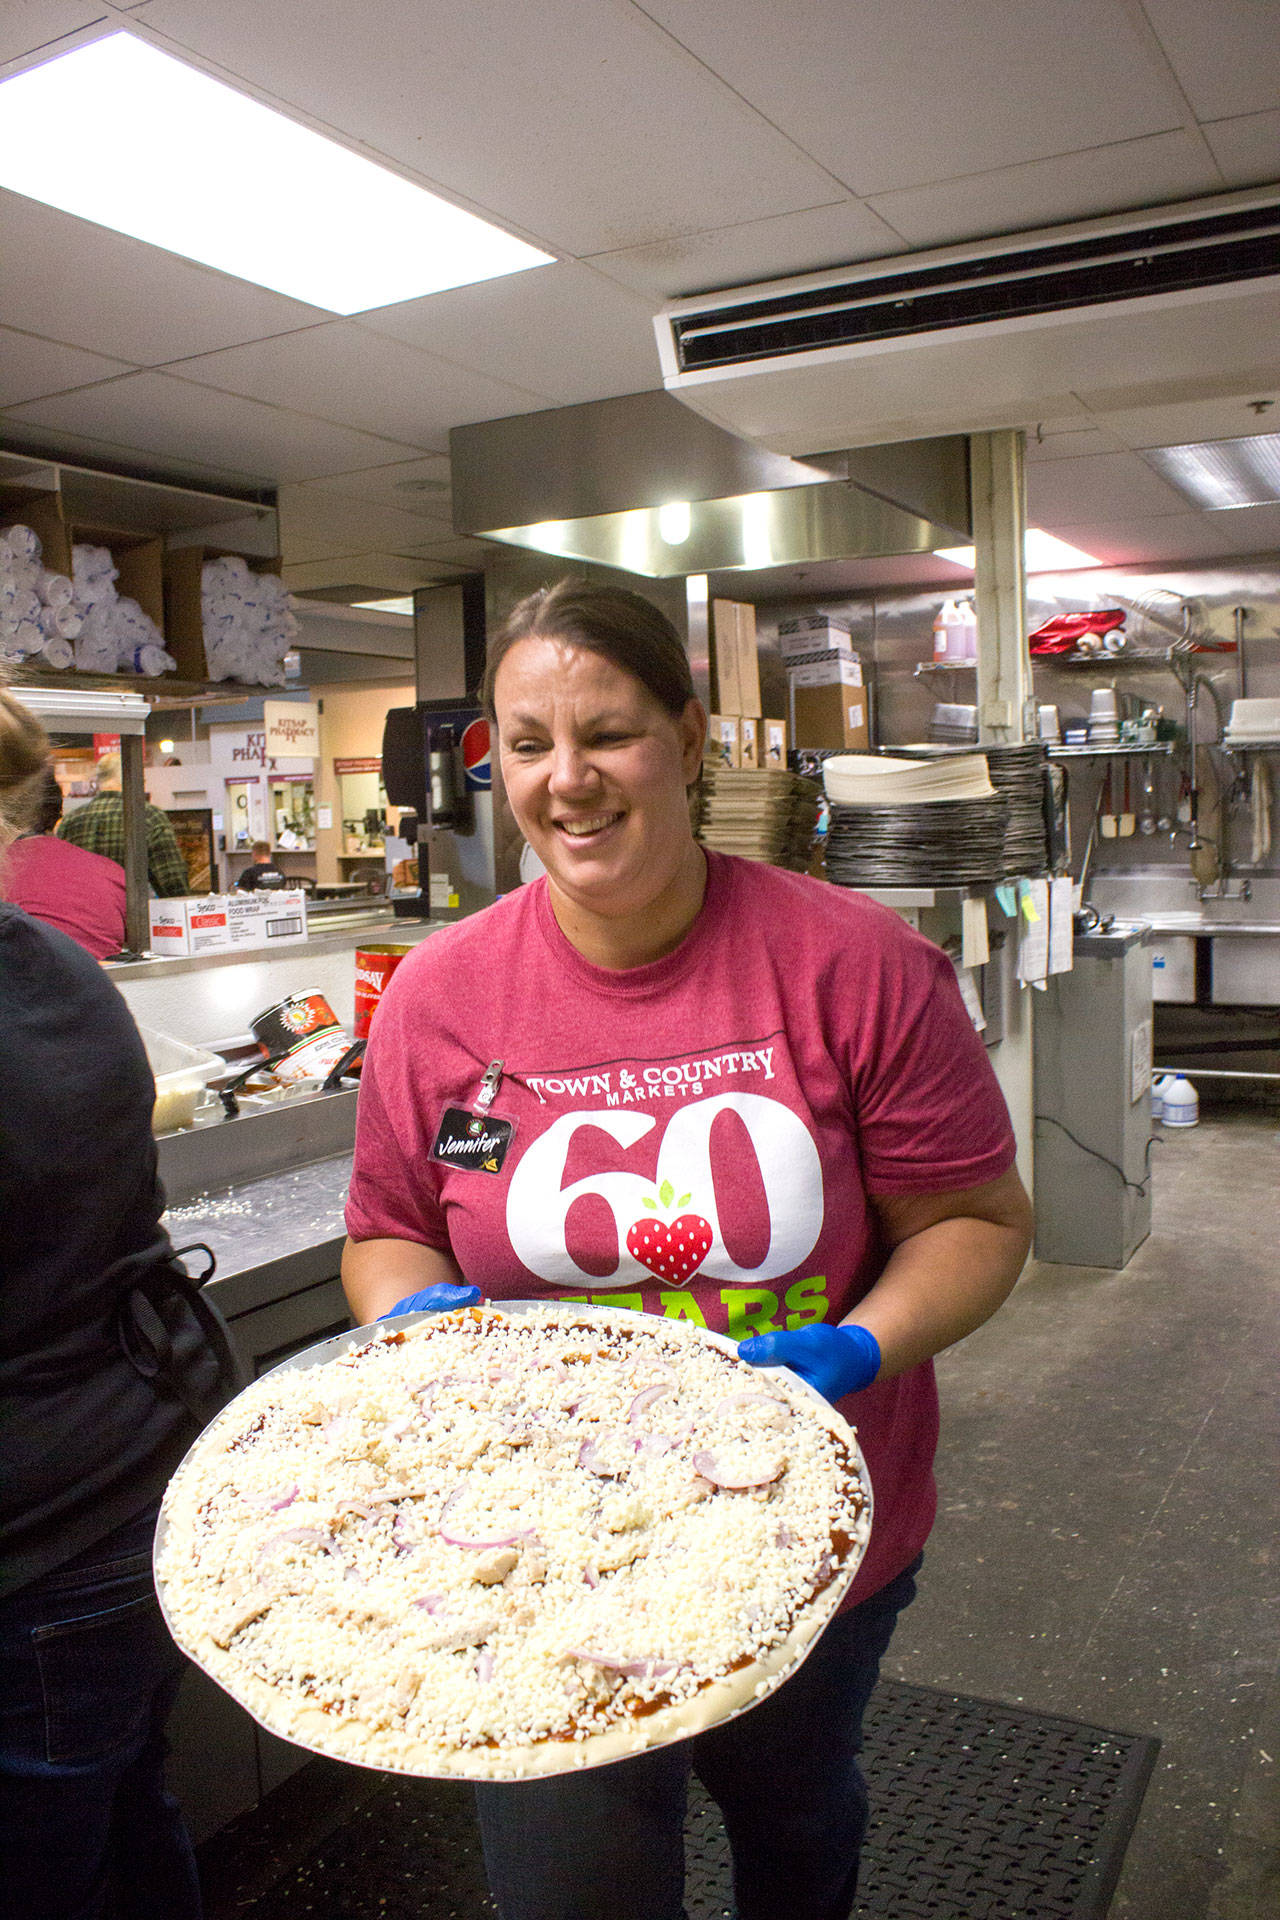 Central Market Pizza & Hot Dogs manager Jennifer Jhonson: “This is a huge family community,” she said of Central Market. “The owners treat employees like people, not some number in the book.” (Sophie Bonomi / Kitsap News Group)